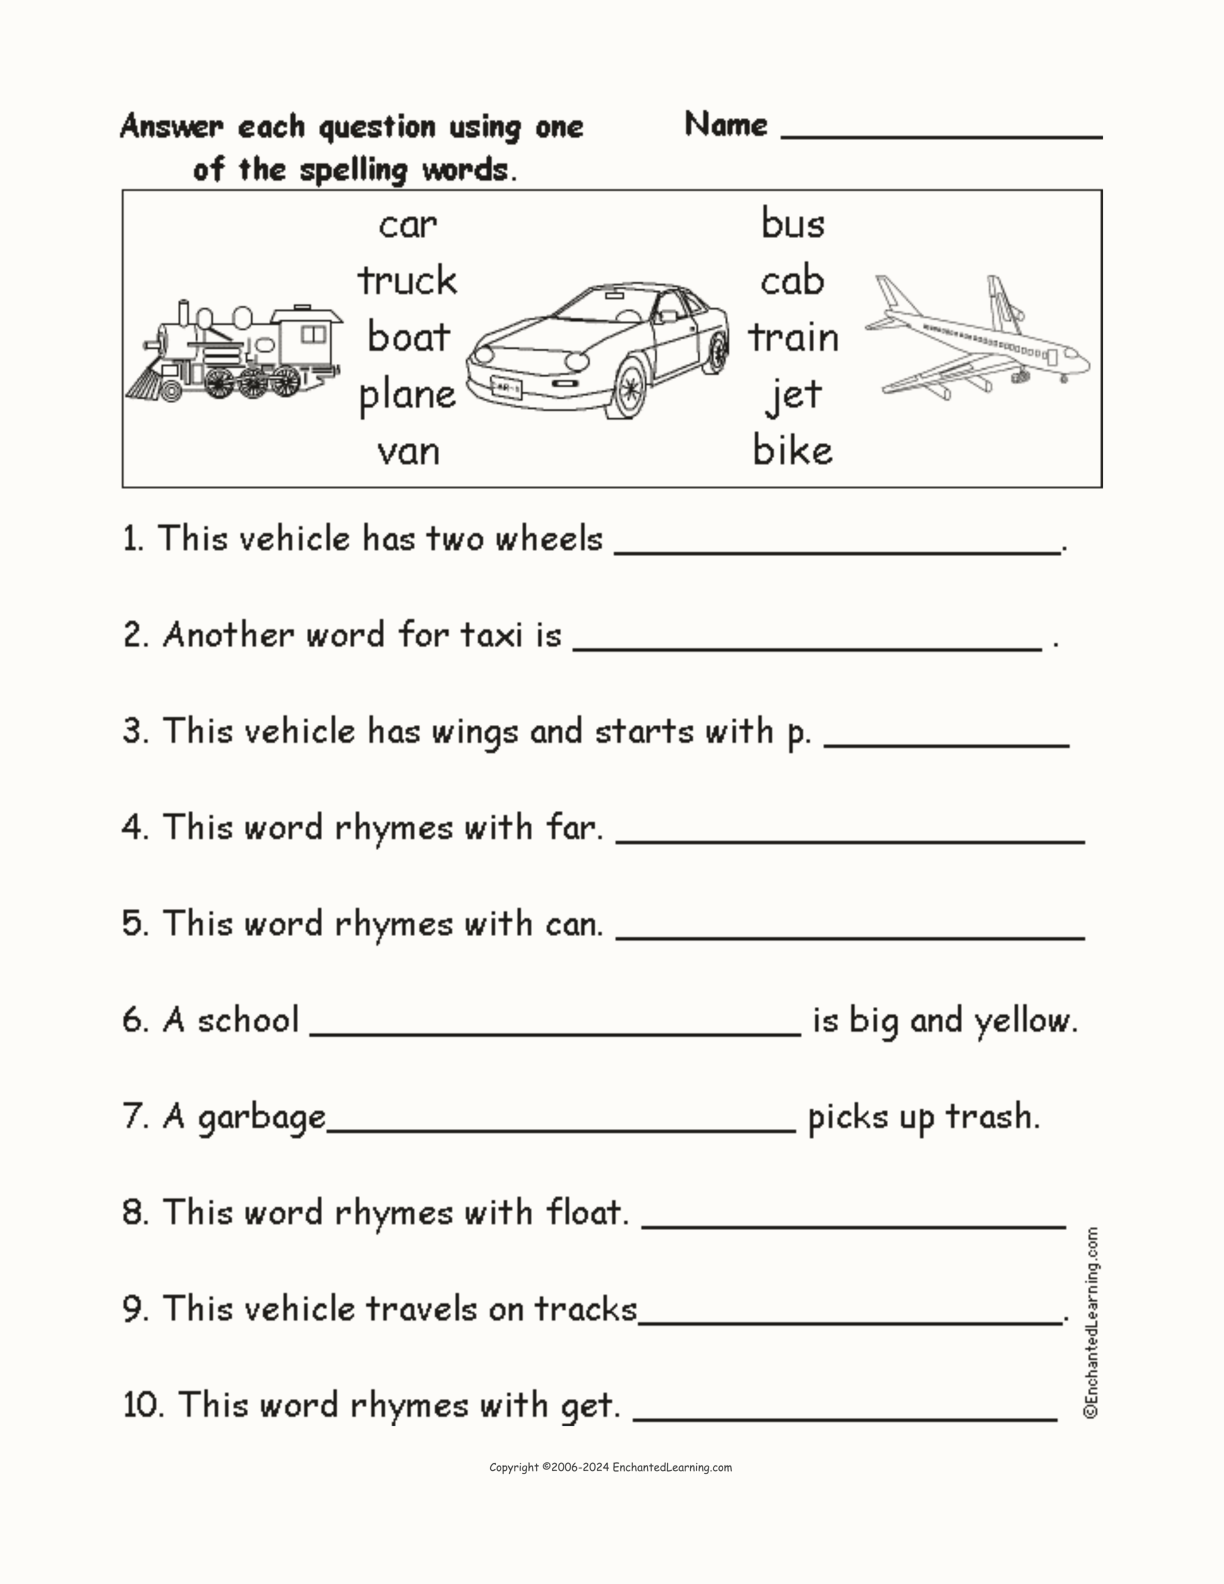 Vehicle Spelling Word Questions interactive worksheet page 1